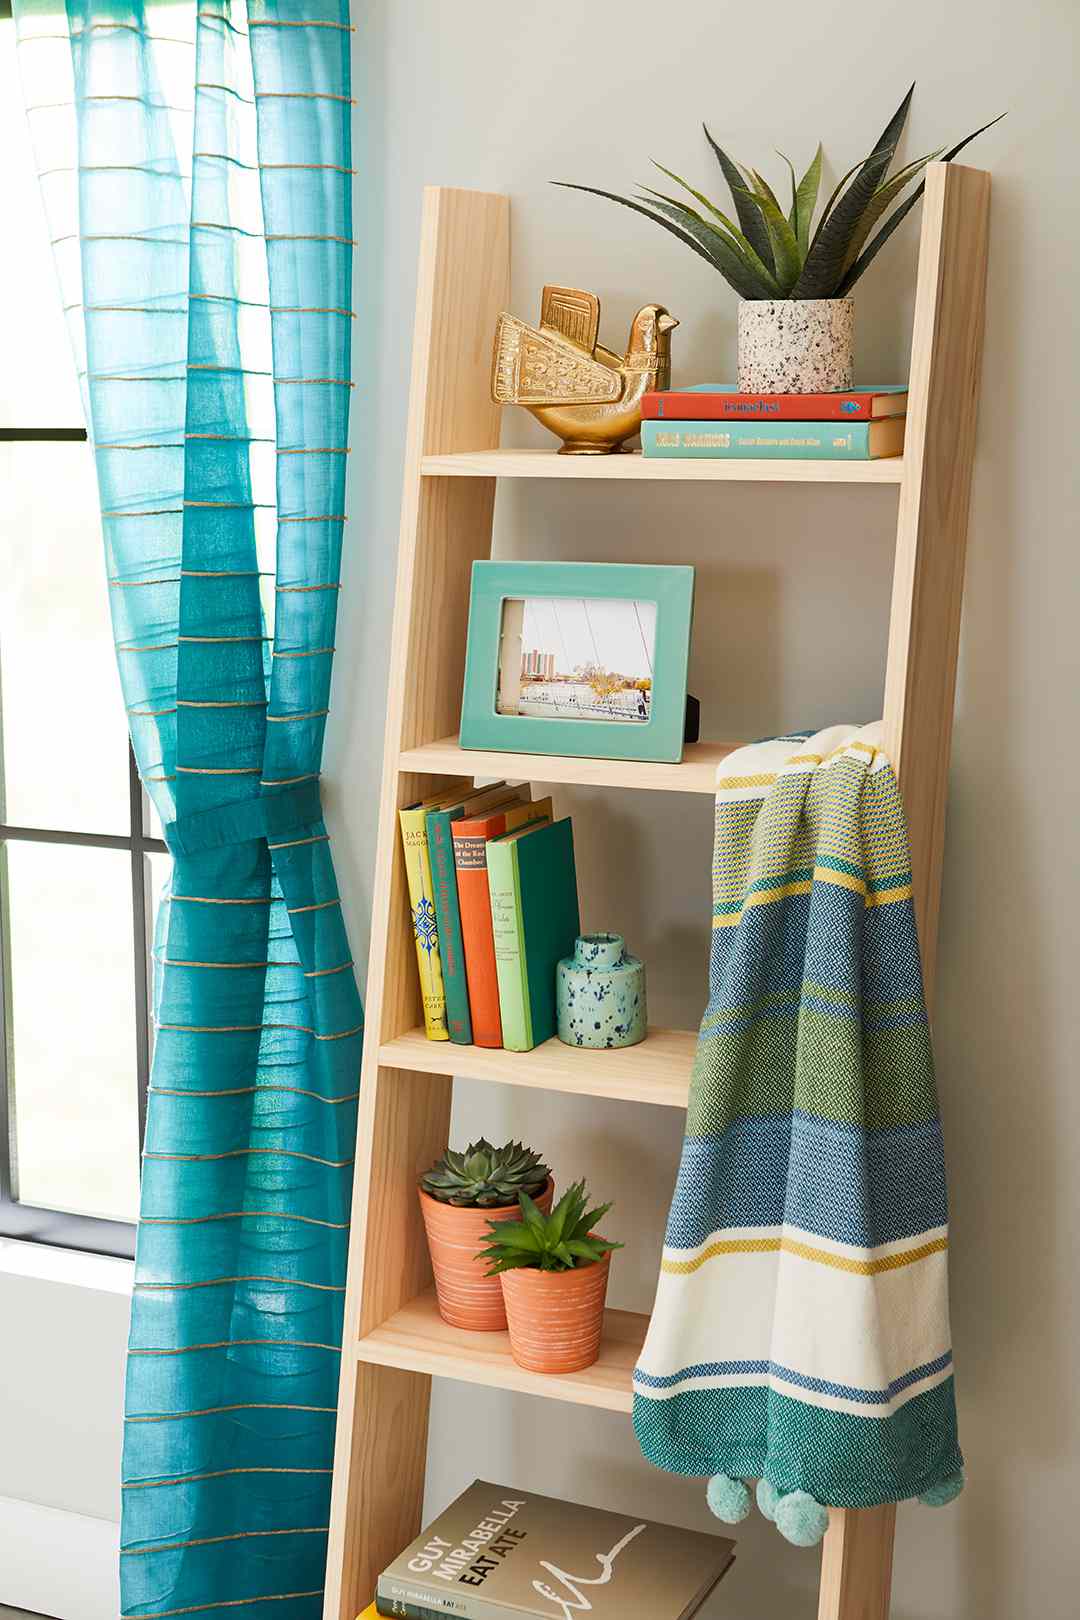 How To Build A Ladder Bookcase Better, Slim Ladder Bookcase